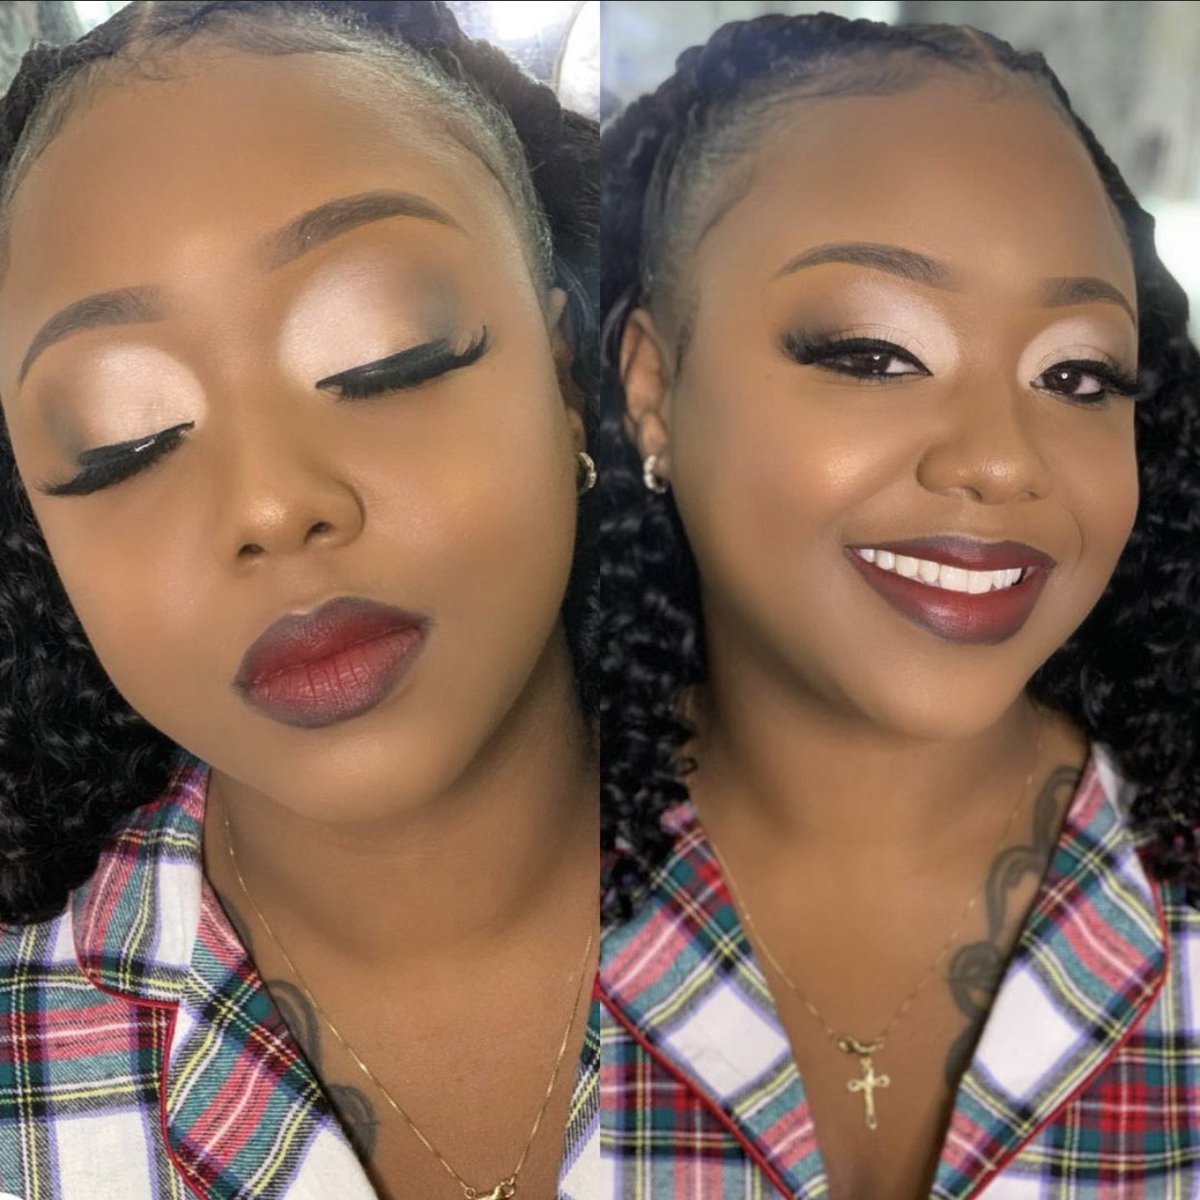 Just before her Family Christmas photoshoot 🎨🎄

Christmas appointments are $20 extra due to it being a major holiday ♥️

Booking link is in our bio. 

Instagram: @PixieBeatz_ 

#Christmas  #Christmas2020 #MiamiMua #PixieBeatz #MiamiMakeupartist #SupportBlackBusiness